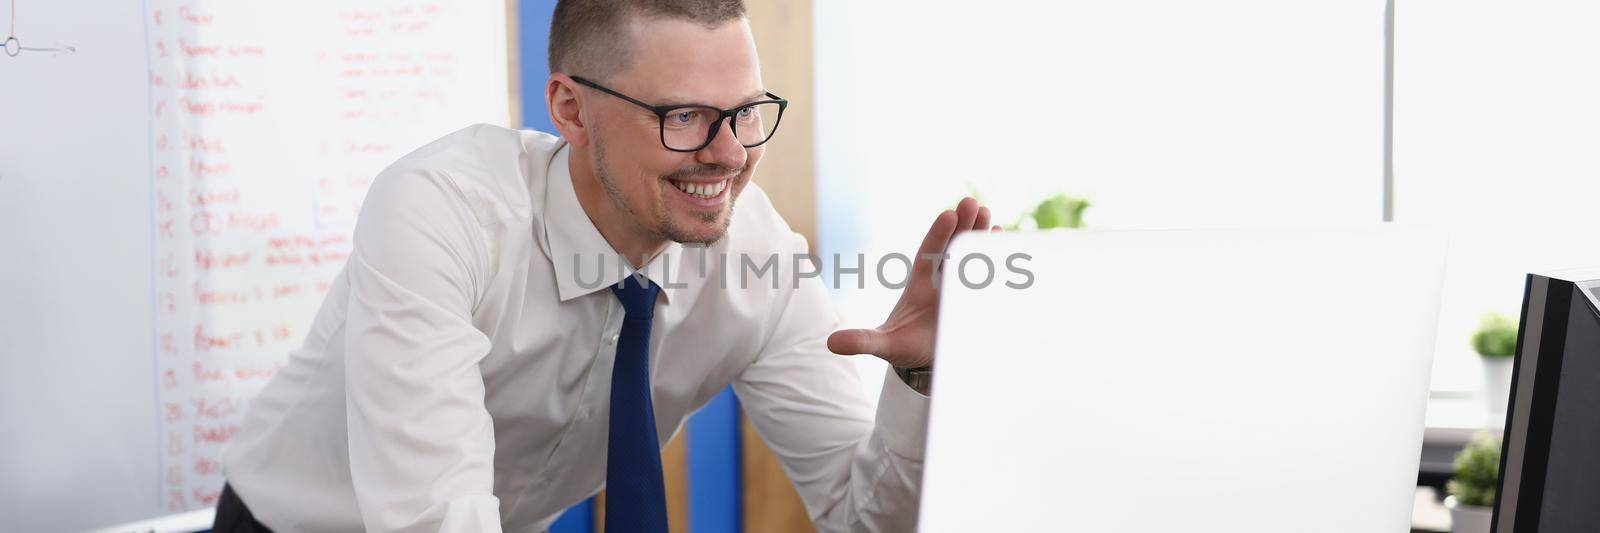 Portrait of smiling worker wave hi to online colleagues on video call. Computer on desk, board with lettering on wall. Business, conference meeting concept